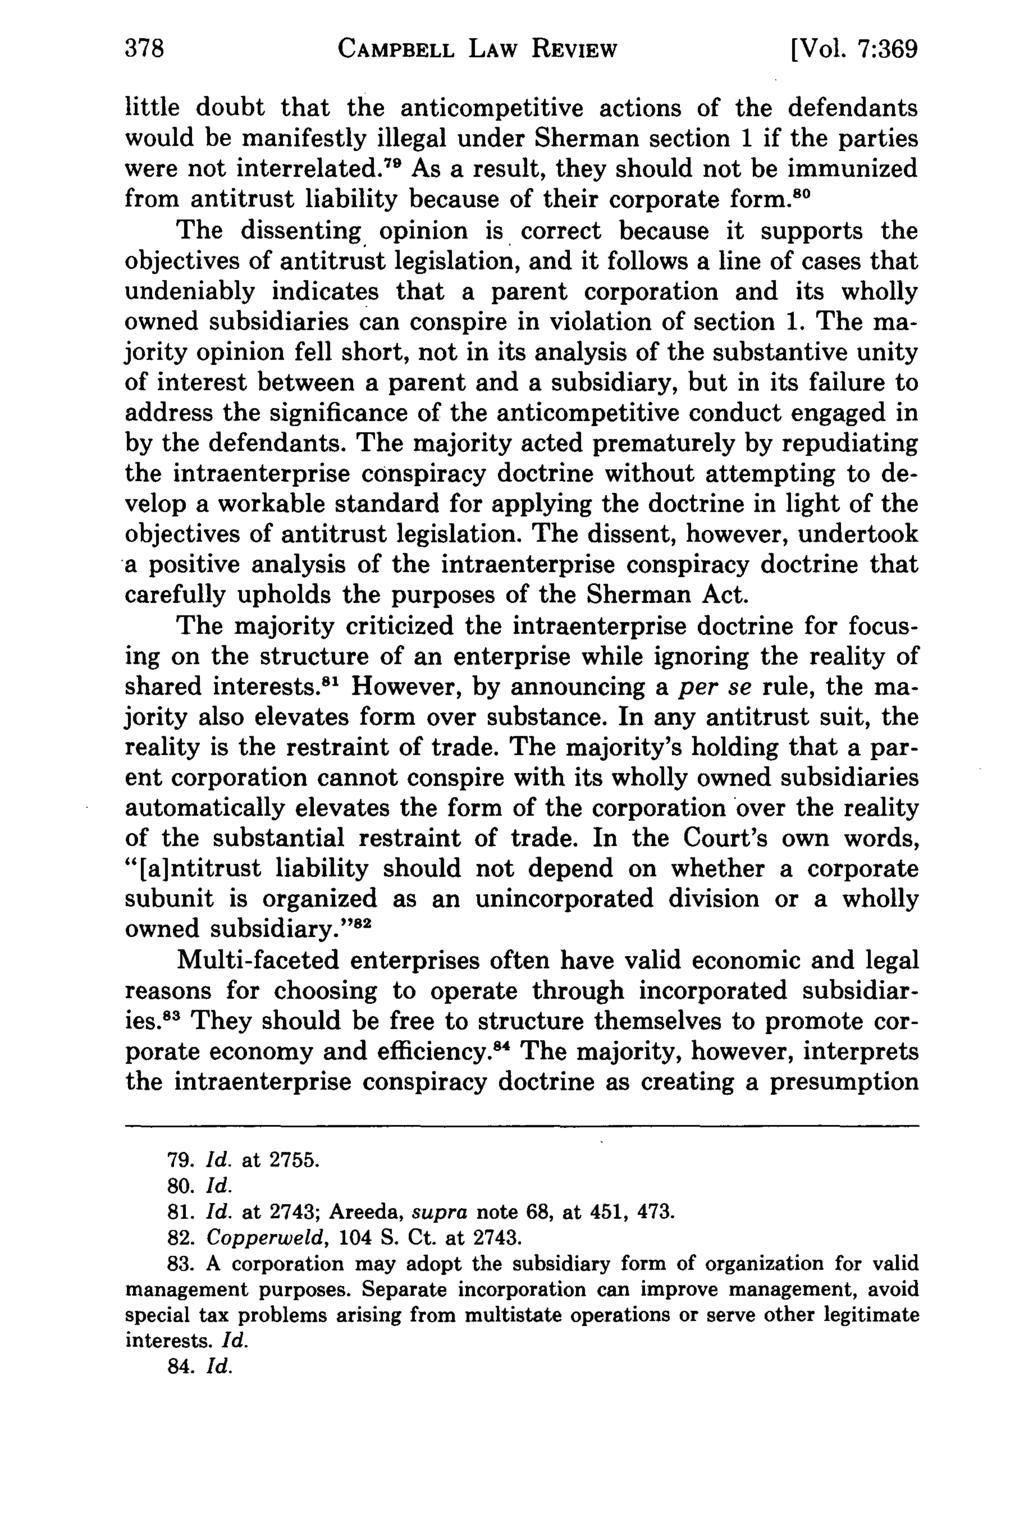 Campbell CAMPBELL Law Review, LAW Vol. 7, REVIEW Iss. 3 [1985], Art. 4 [Vol.